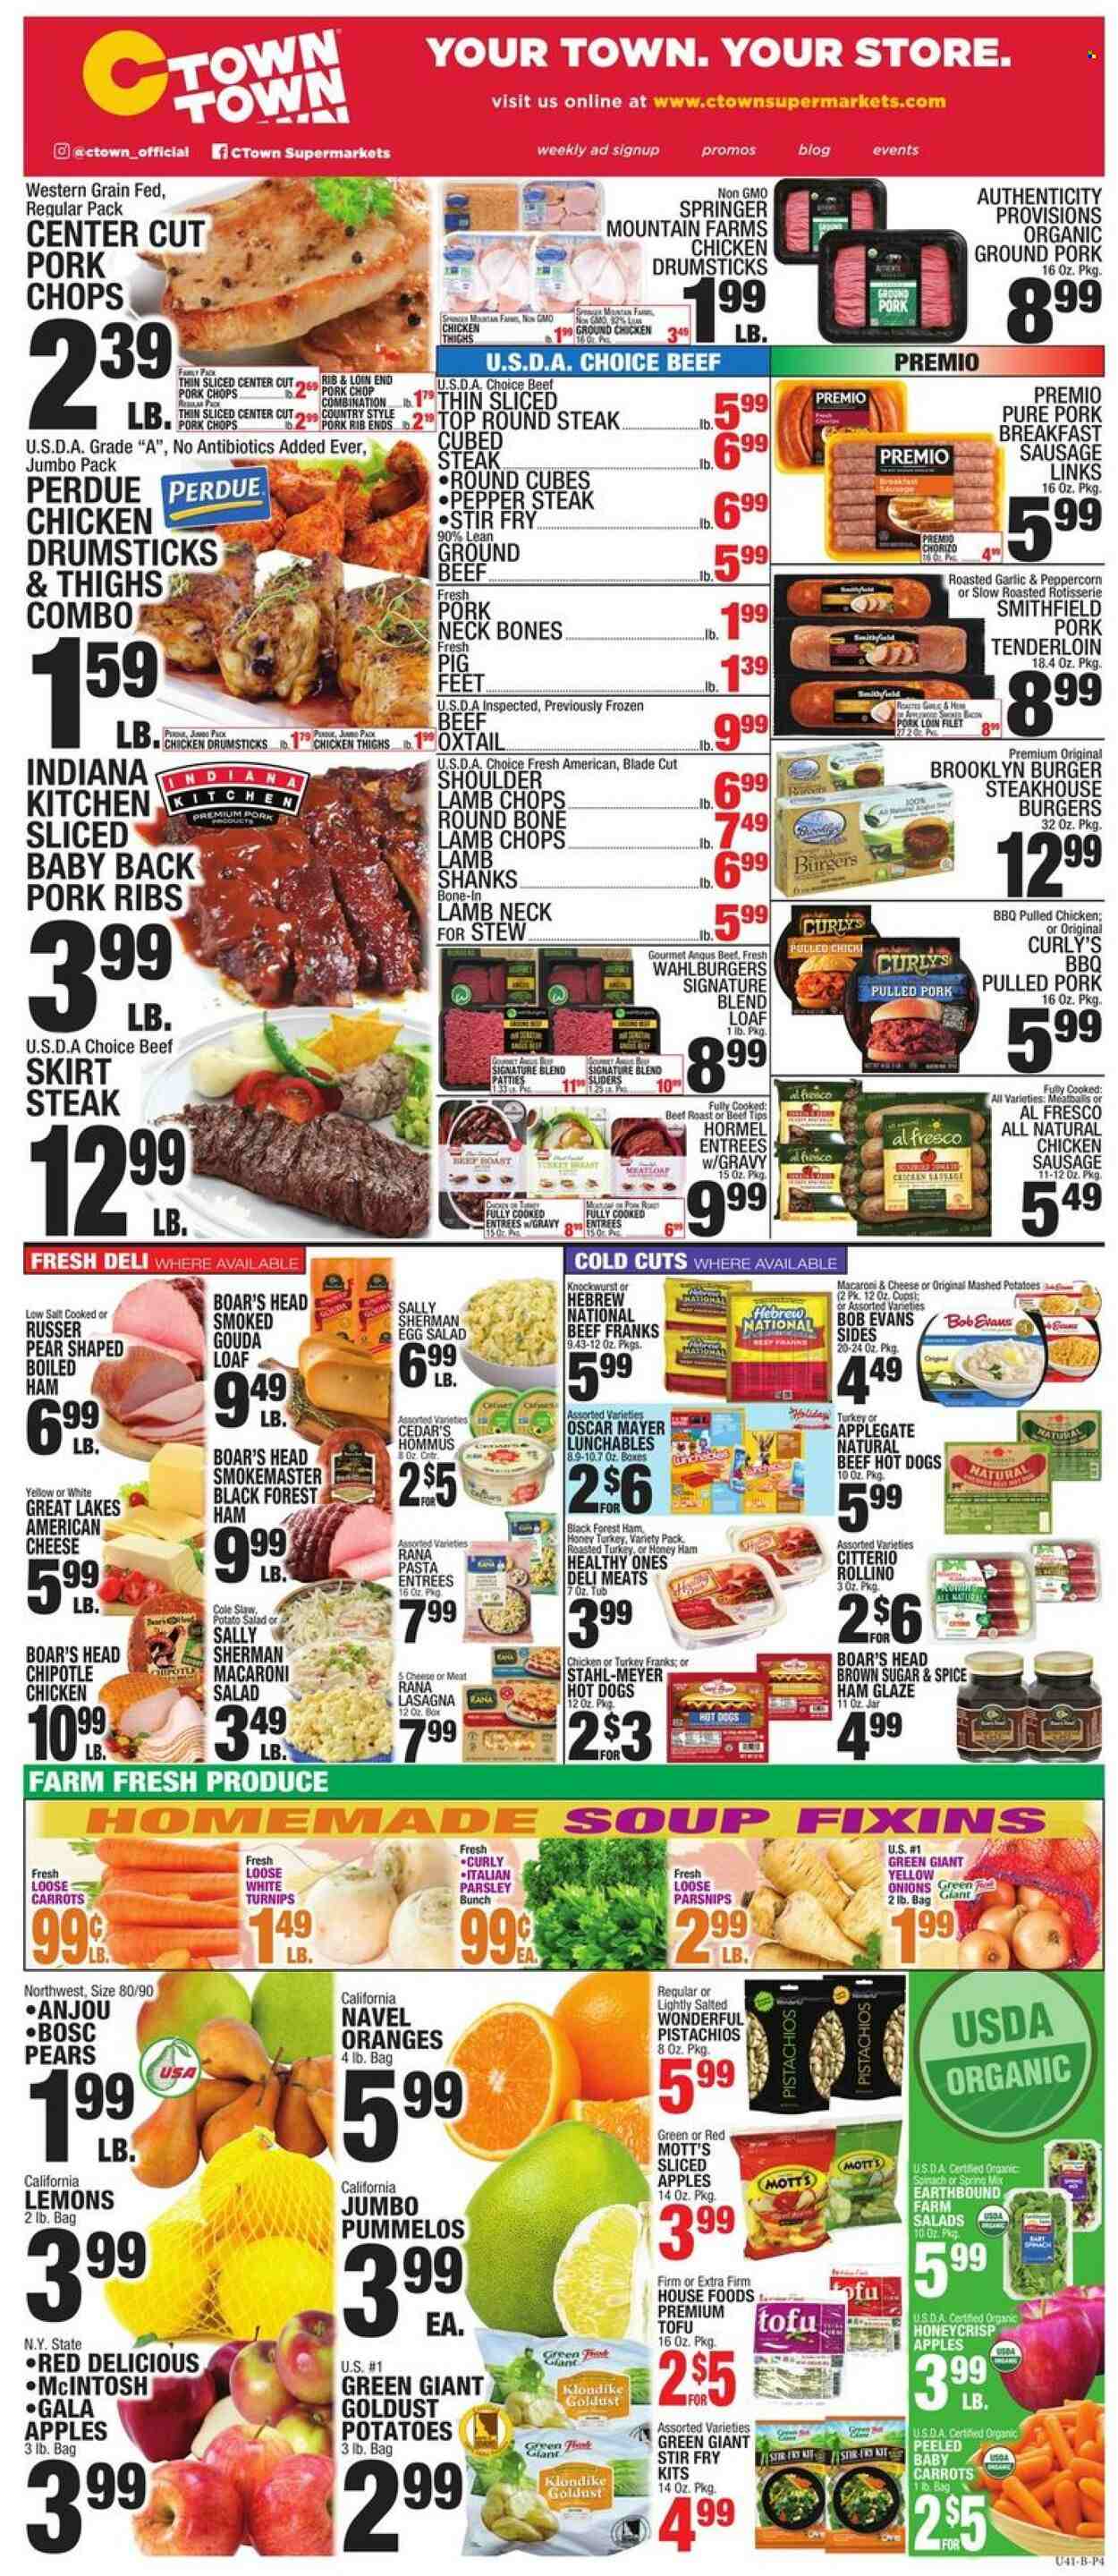 thumbnail - C-Town Flyer - 12/02/2022 - 12/08/2022 - Sales products - carrots, parsley, parsnips, salad, apples, Gala, Red Delicious apples, oranges, Mott's, mashed potatoes, hot dog, meatballs, soup, hamburger, pasta, lasagna meal, Perdue®, Lunchables, Bob Evans, pulled pork, pulled chicken, Rana, Hormel, ham, chorizo, Oscar Mayer, sausage, chicken sausage, hummus, potato salad, macaroni salad, american cheese, tofu, eggs, cane sugar, spice, ham glaze, pistachios, beer, ground chicken, chicken thighs, chicken drumsticks, beef meat, ground beef, oxtail, steak, round steak, roast beef, ground pork, pork chops, pork loin, pork meat, pork ribs, pork tenderloin, pork back ribs, lamb chops, lamb meat, turnips, lemons, navel oranges. Page 4.